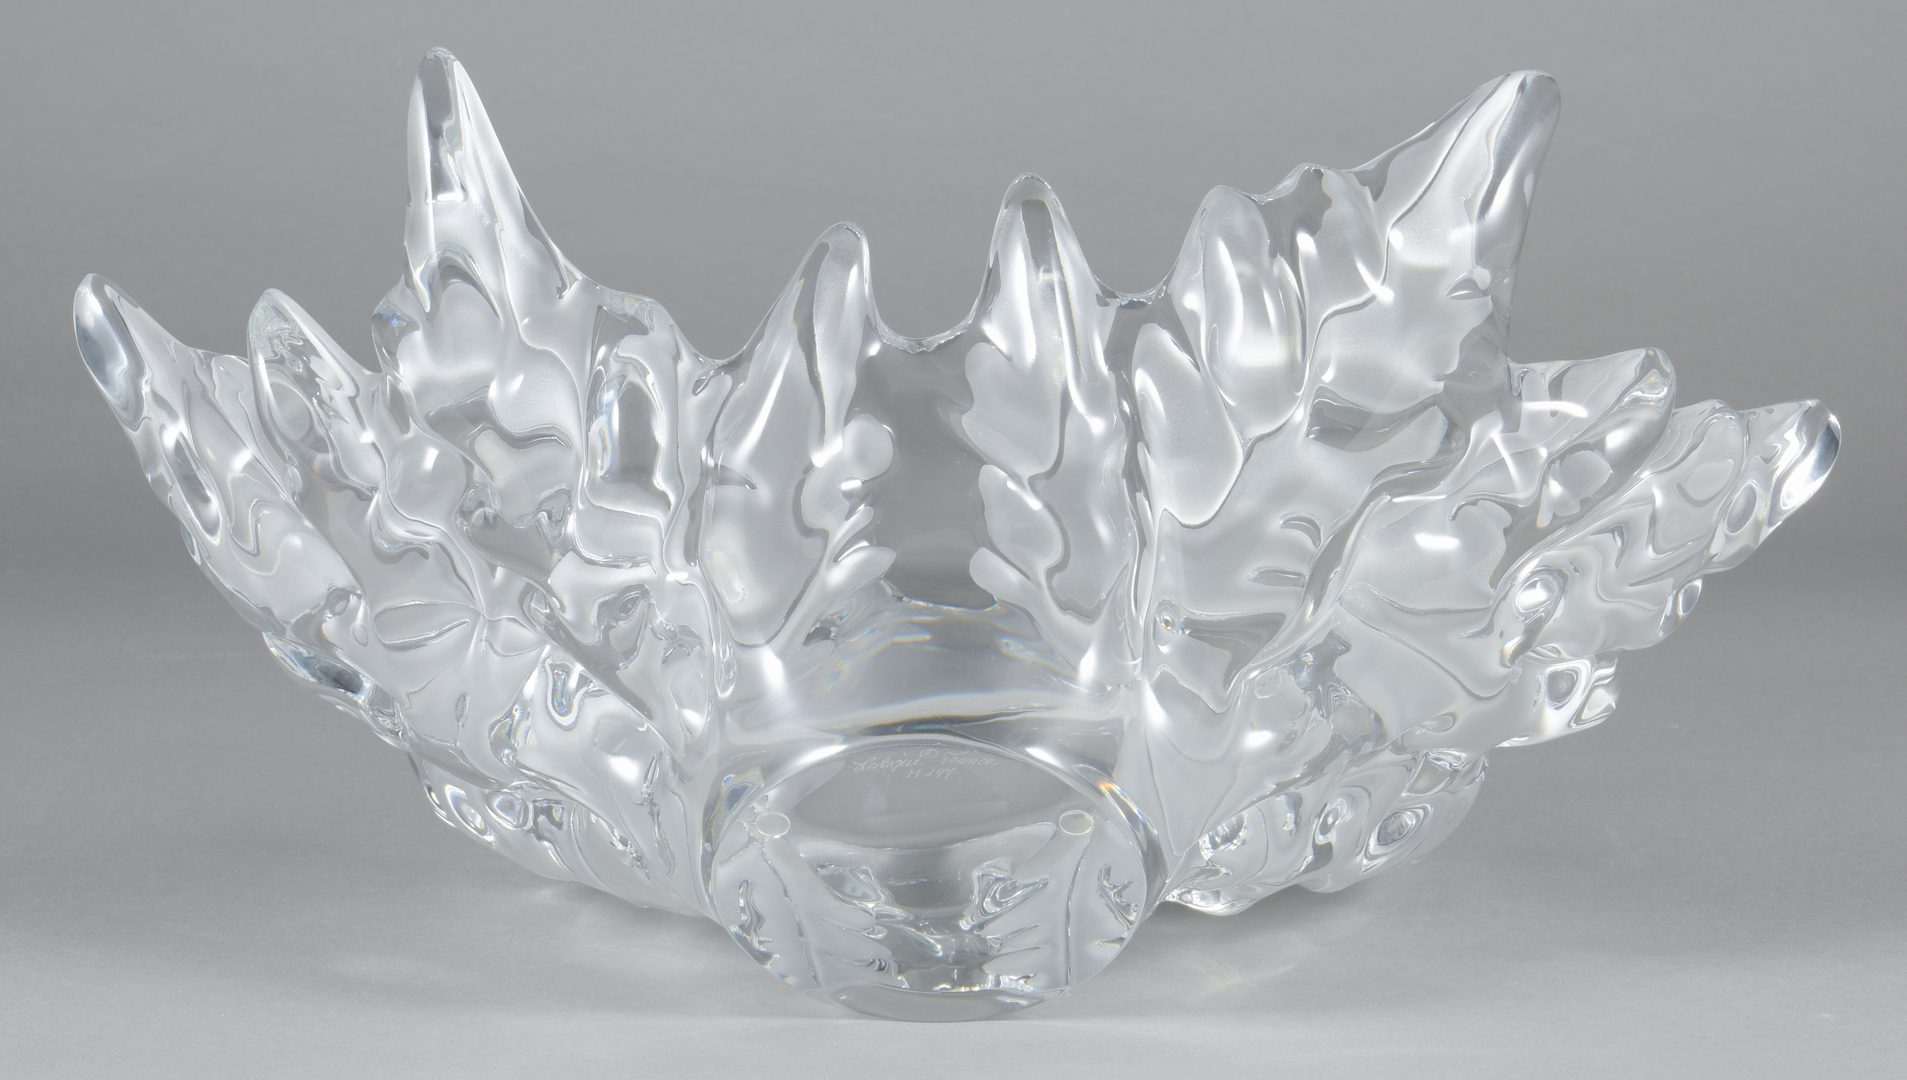 Lot 419: Lalique "Champs Elysee" Crystal Center Bowl